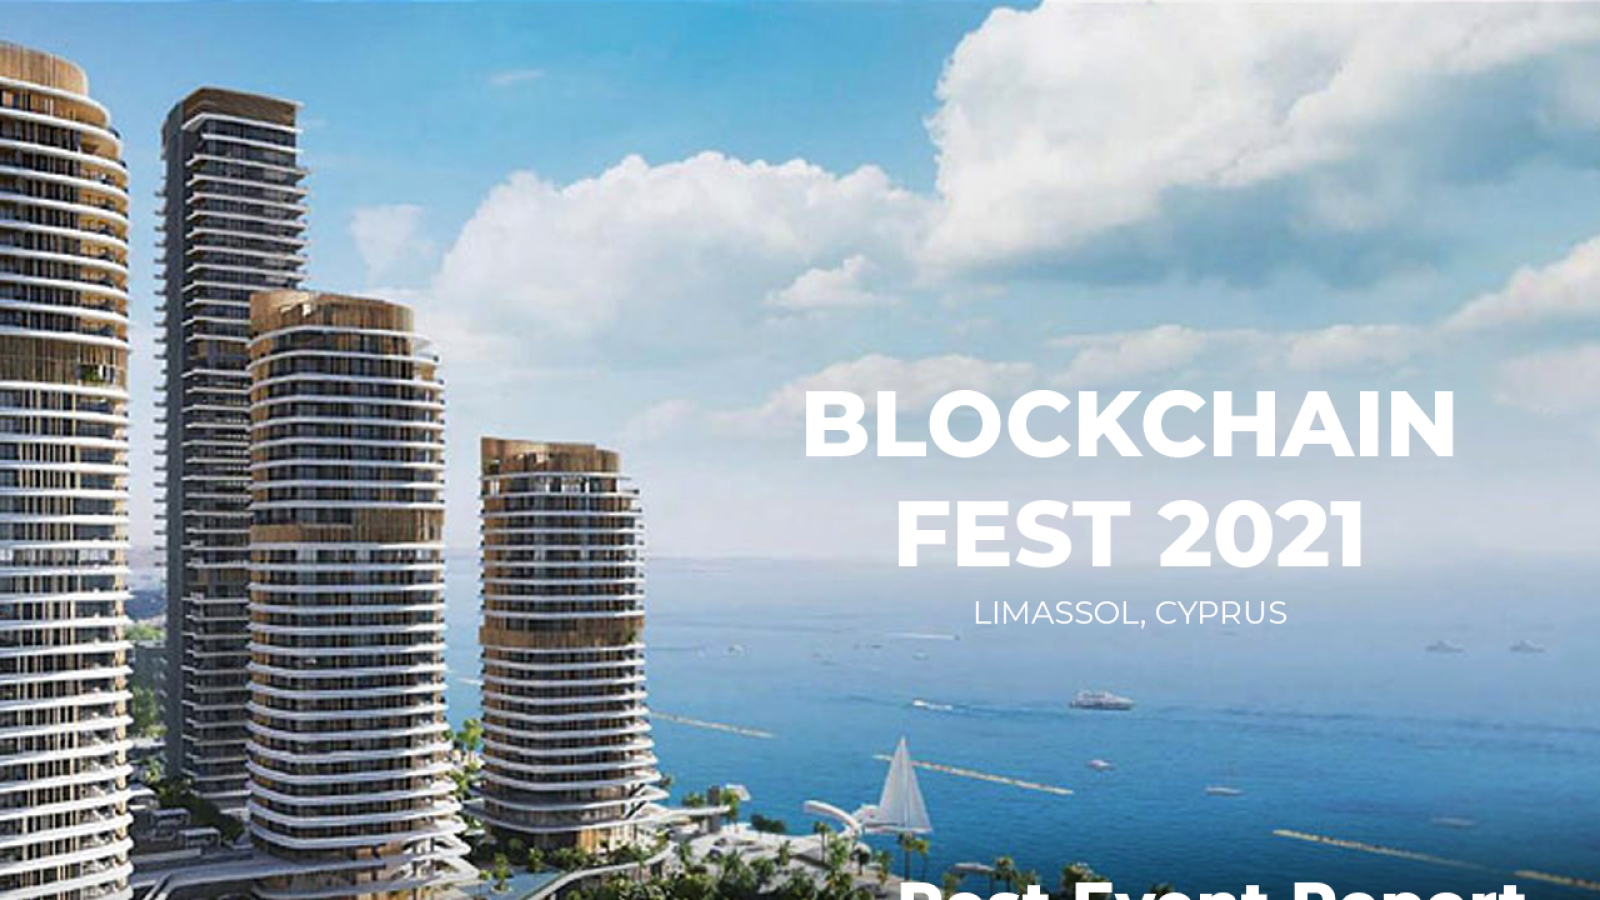 Blockchain Fest 2021 Successfully Took Place in Cyprus, Limassol